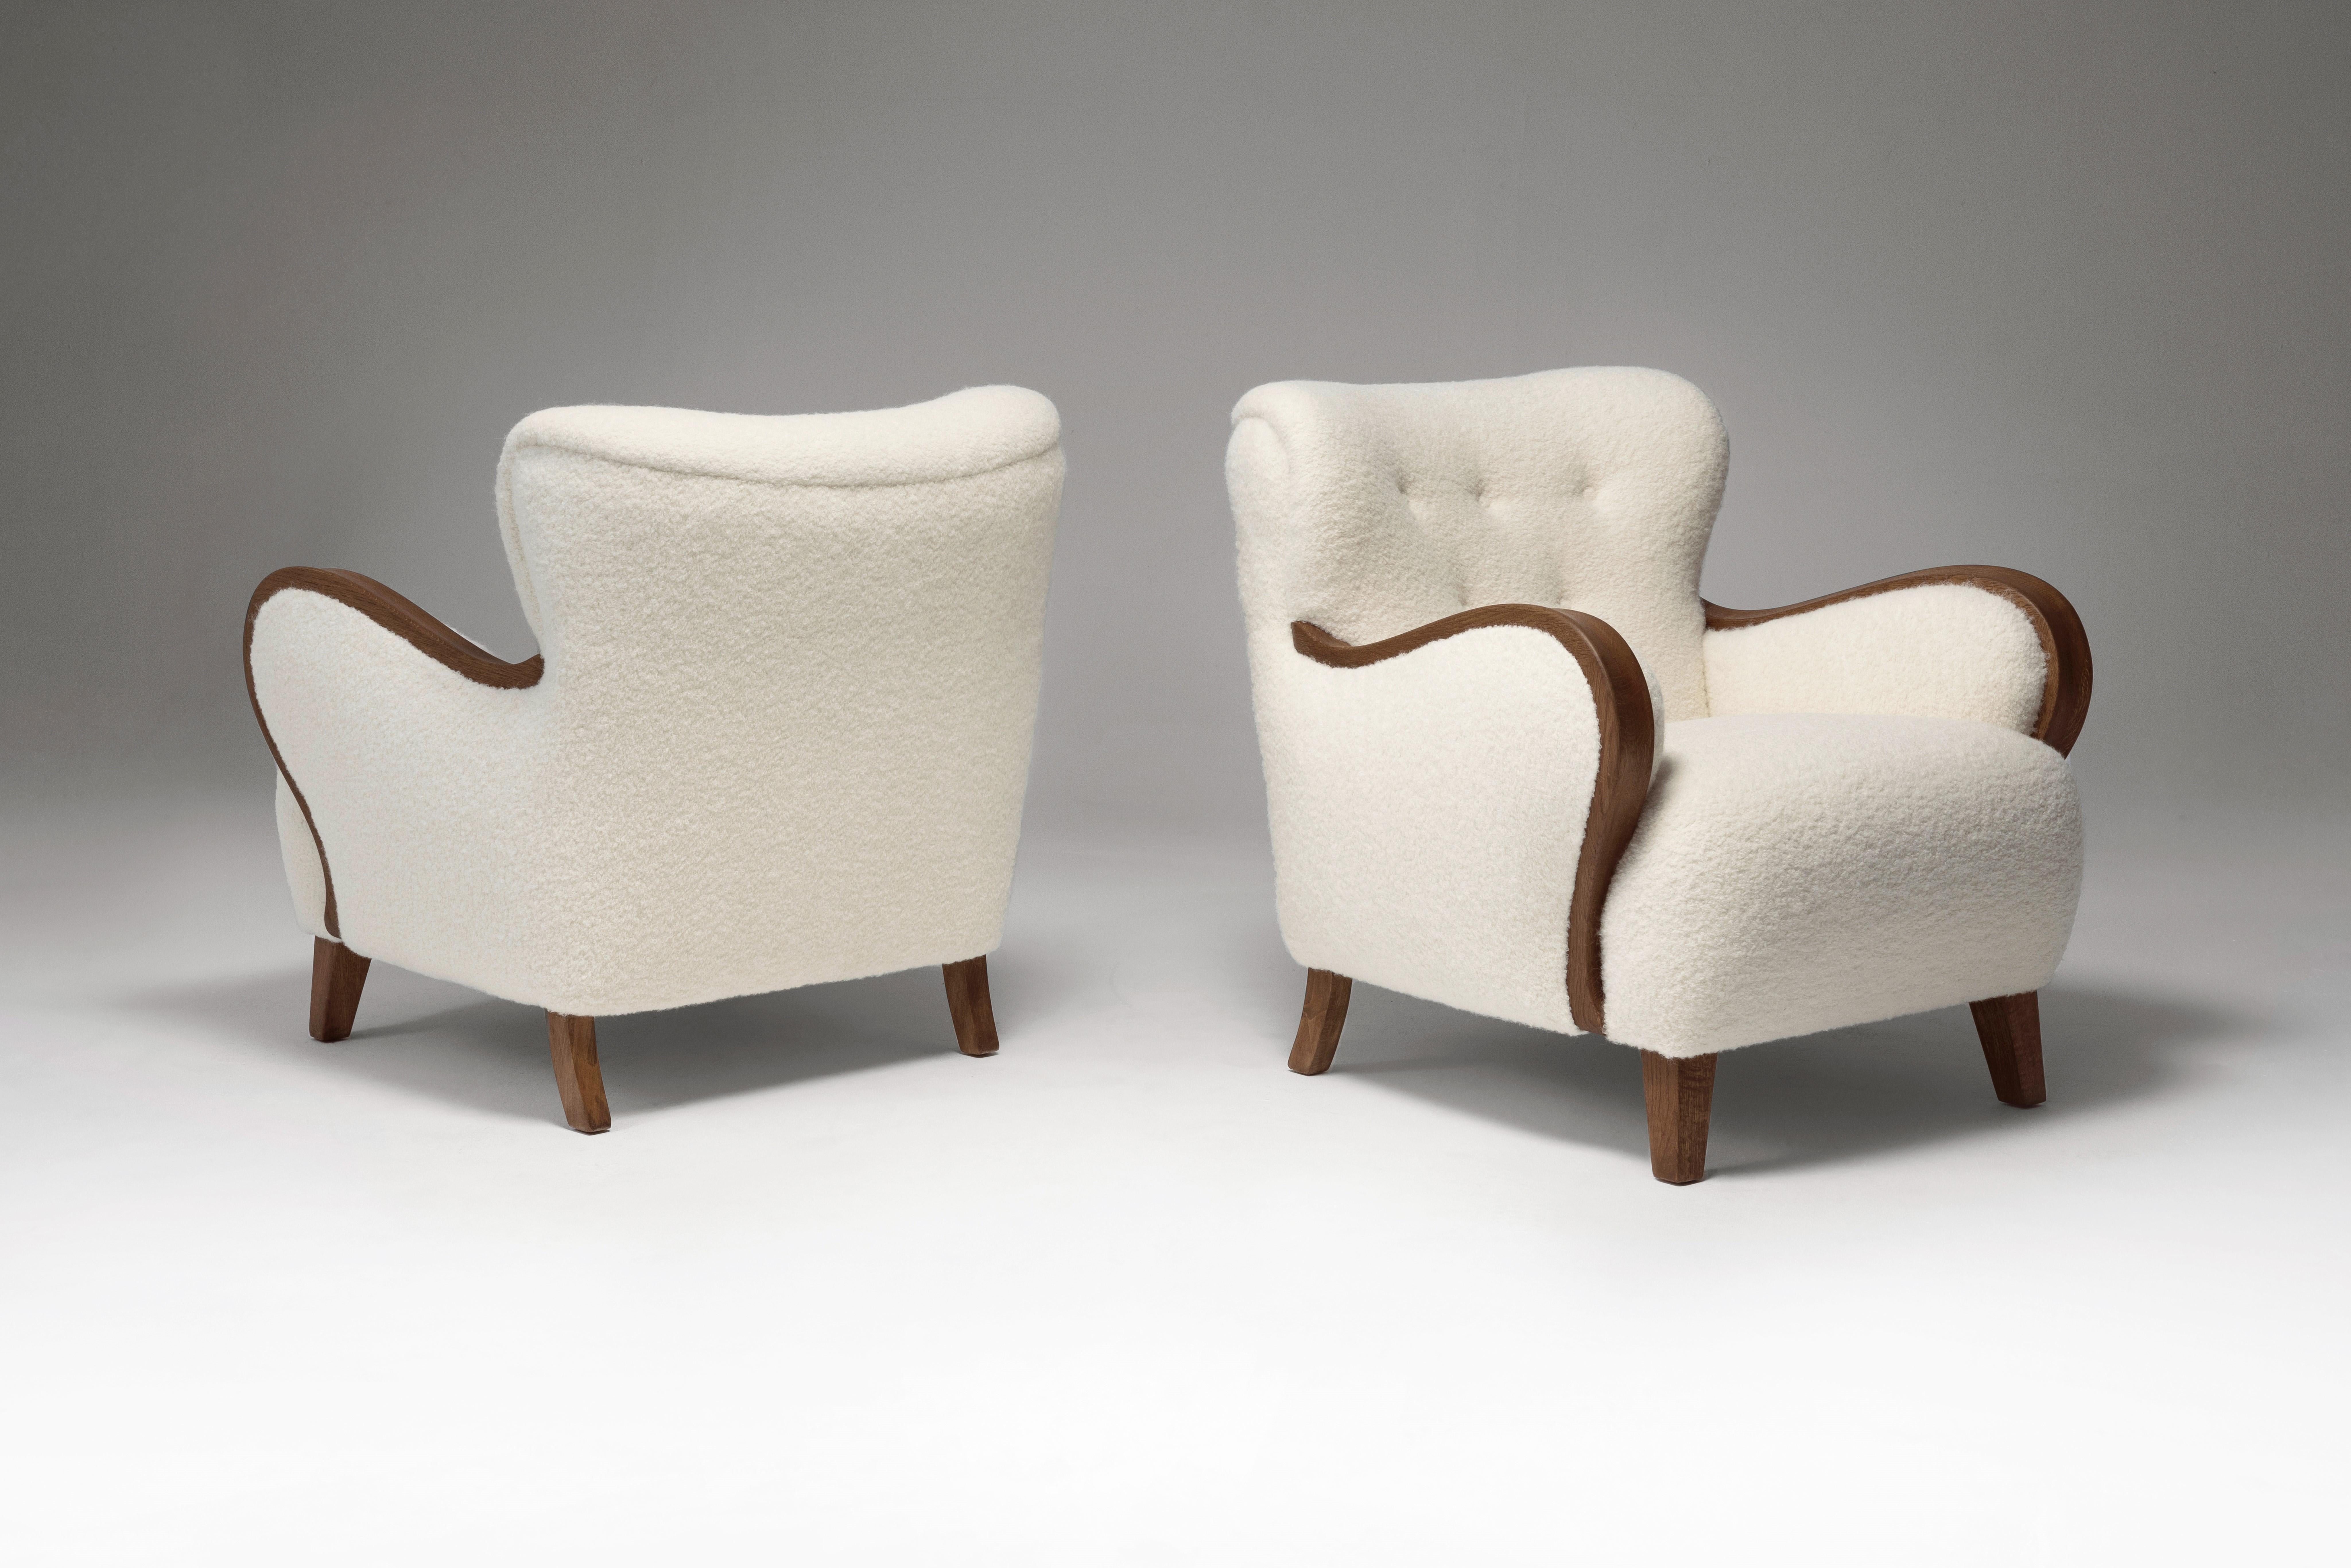 Scandinavian Modern Pair of Lounge Chairs  with Curved Oak Armrests, Denmark, 1940s